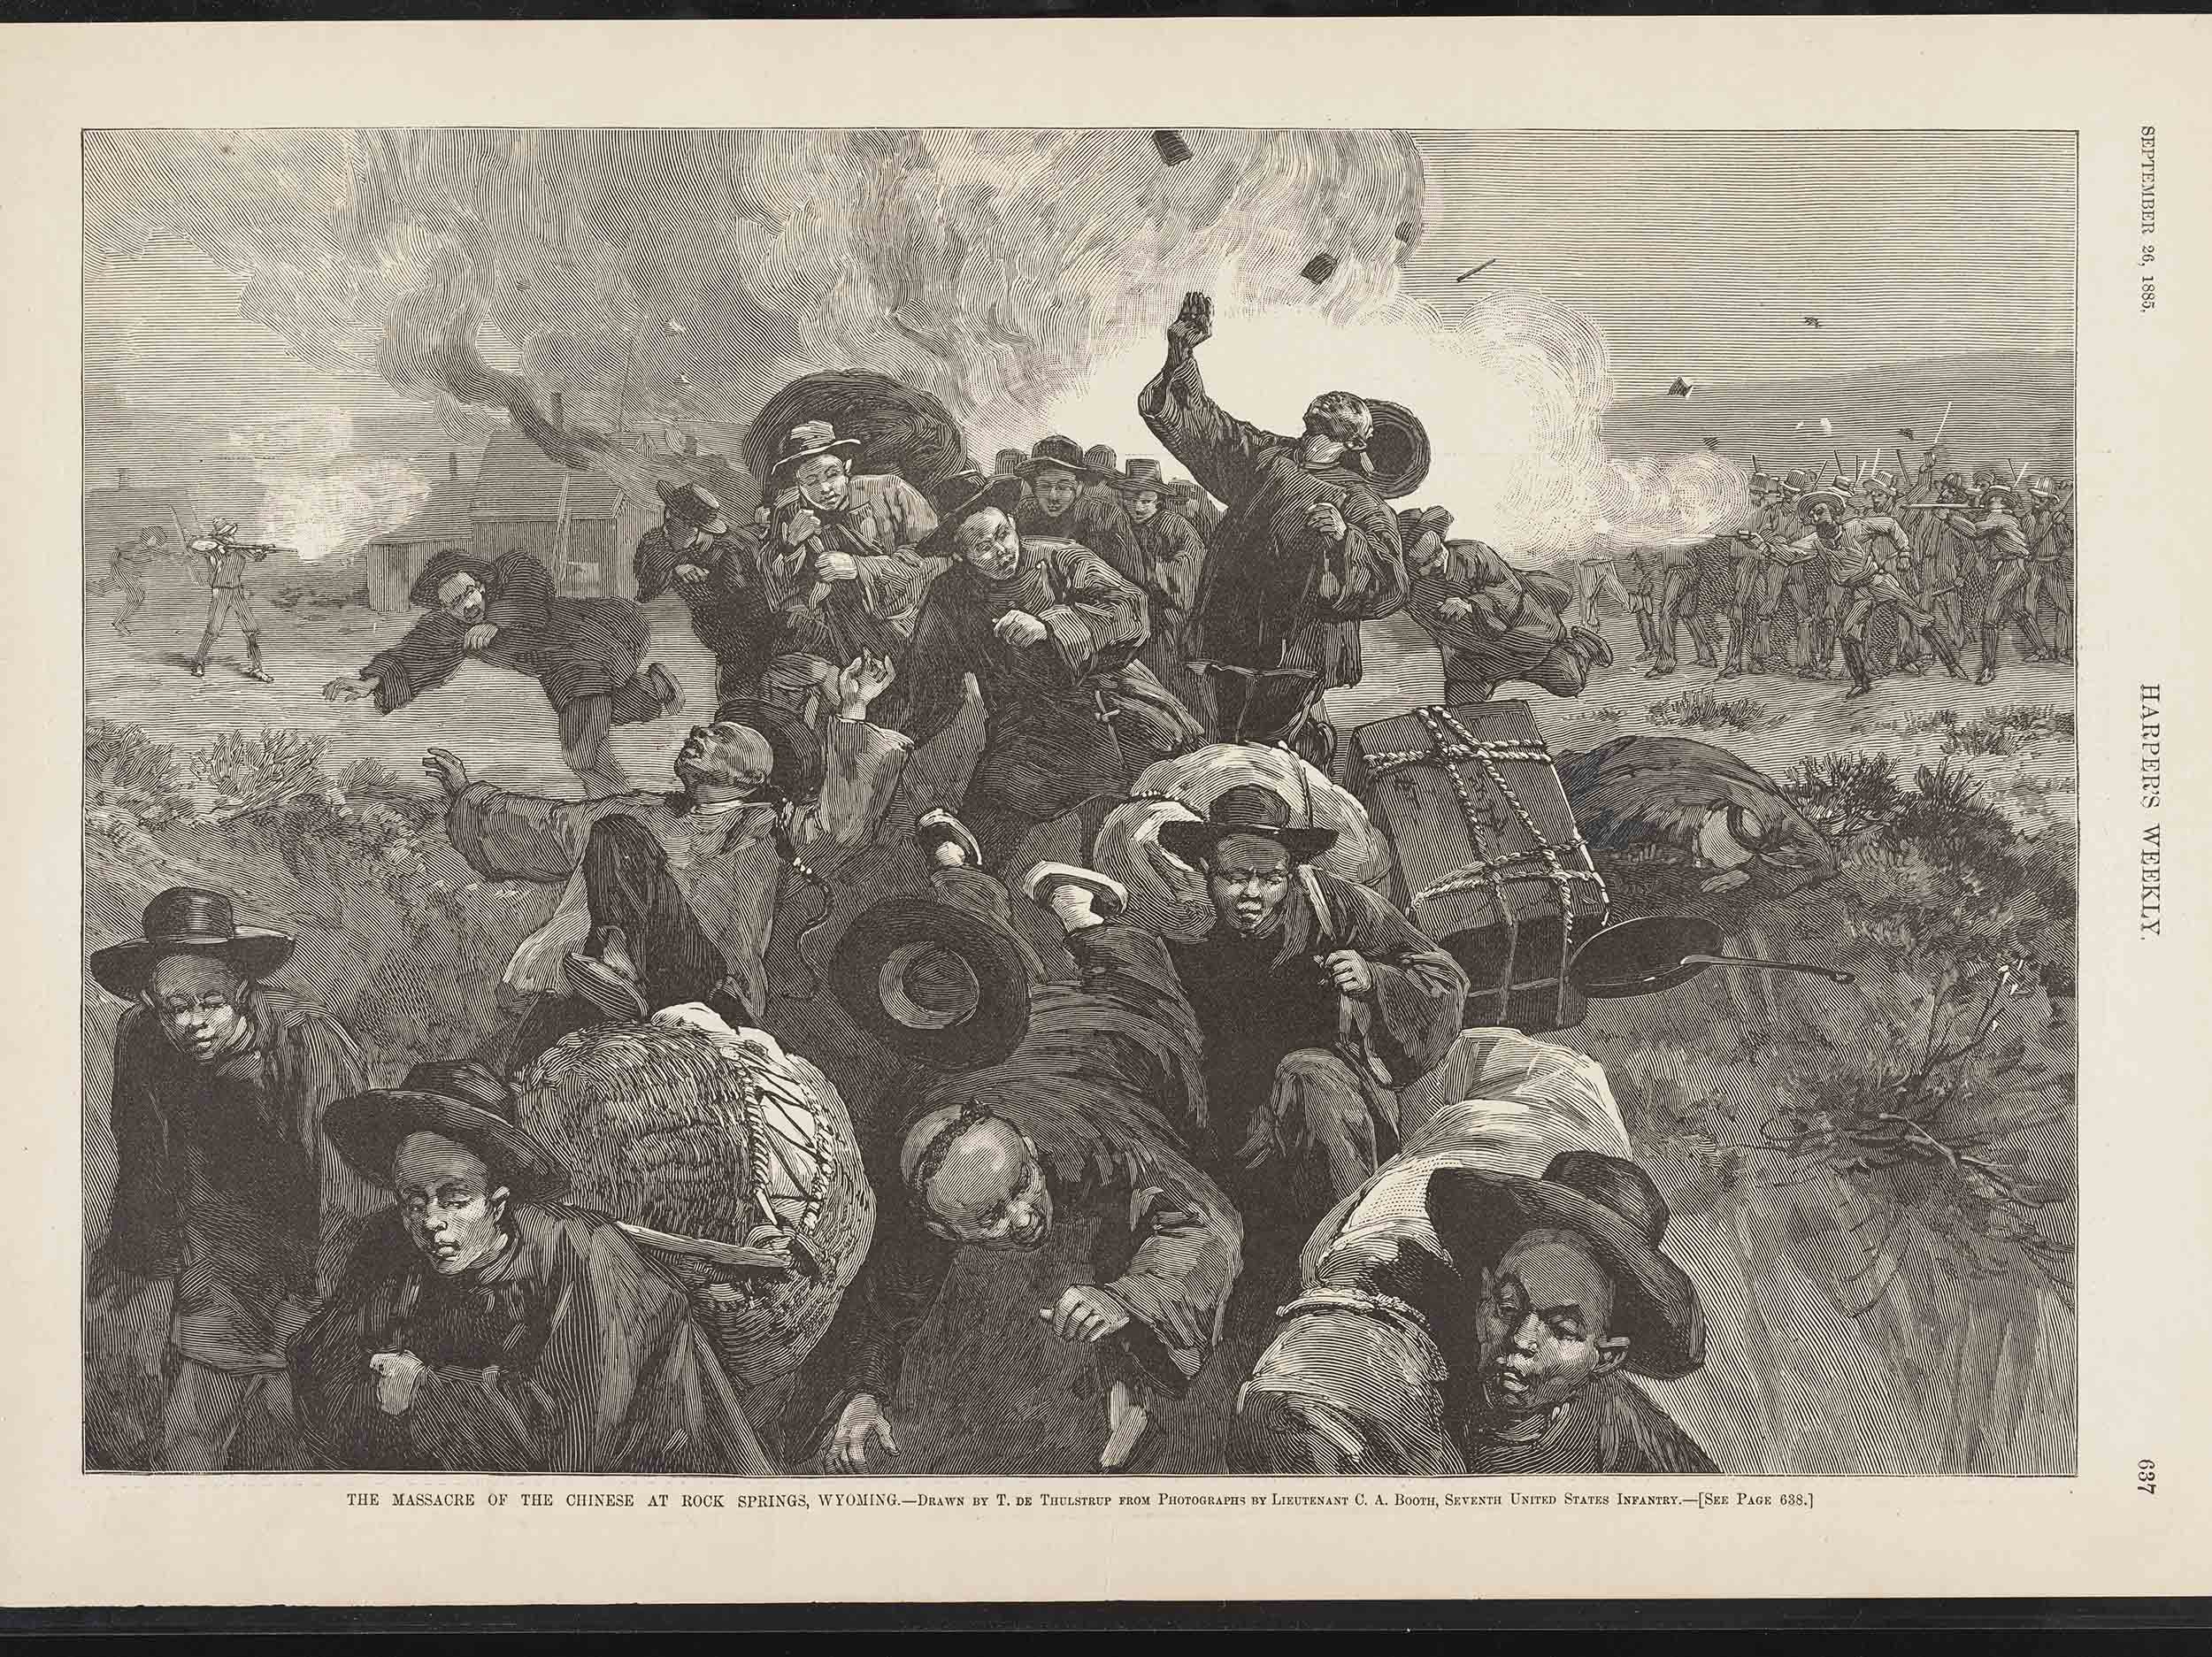 Drawing depiction of the Rock Spring Massacre